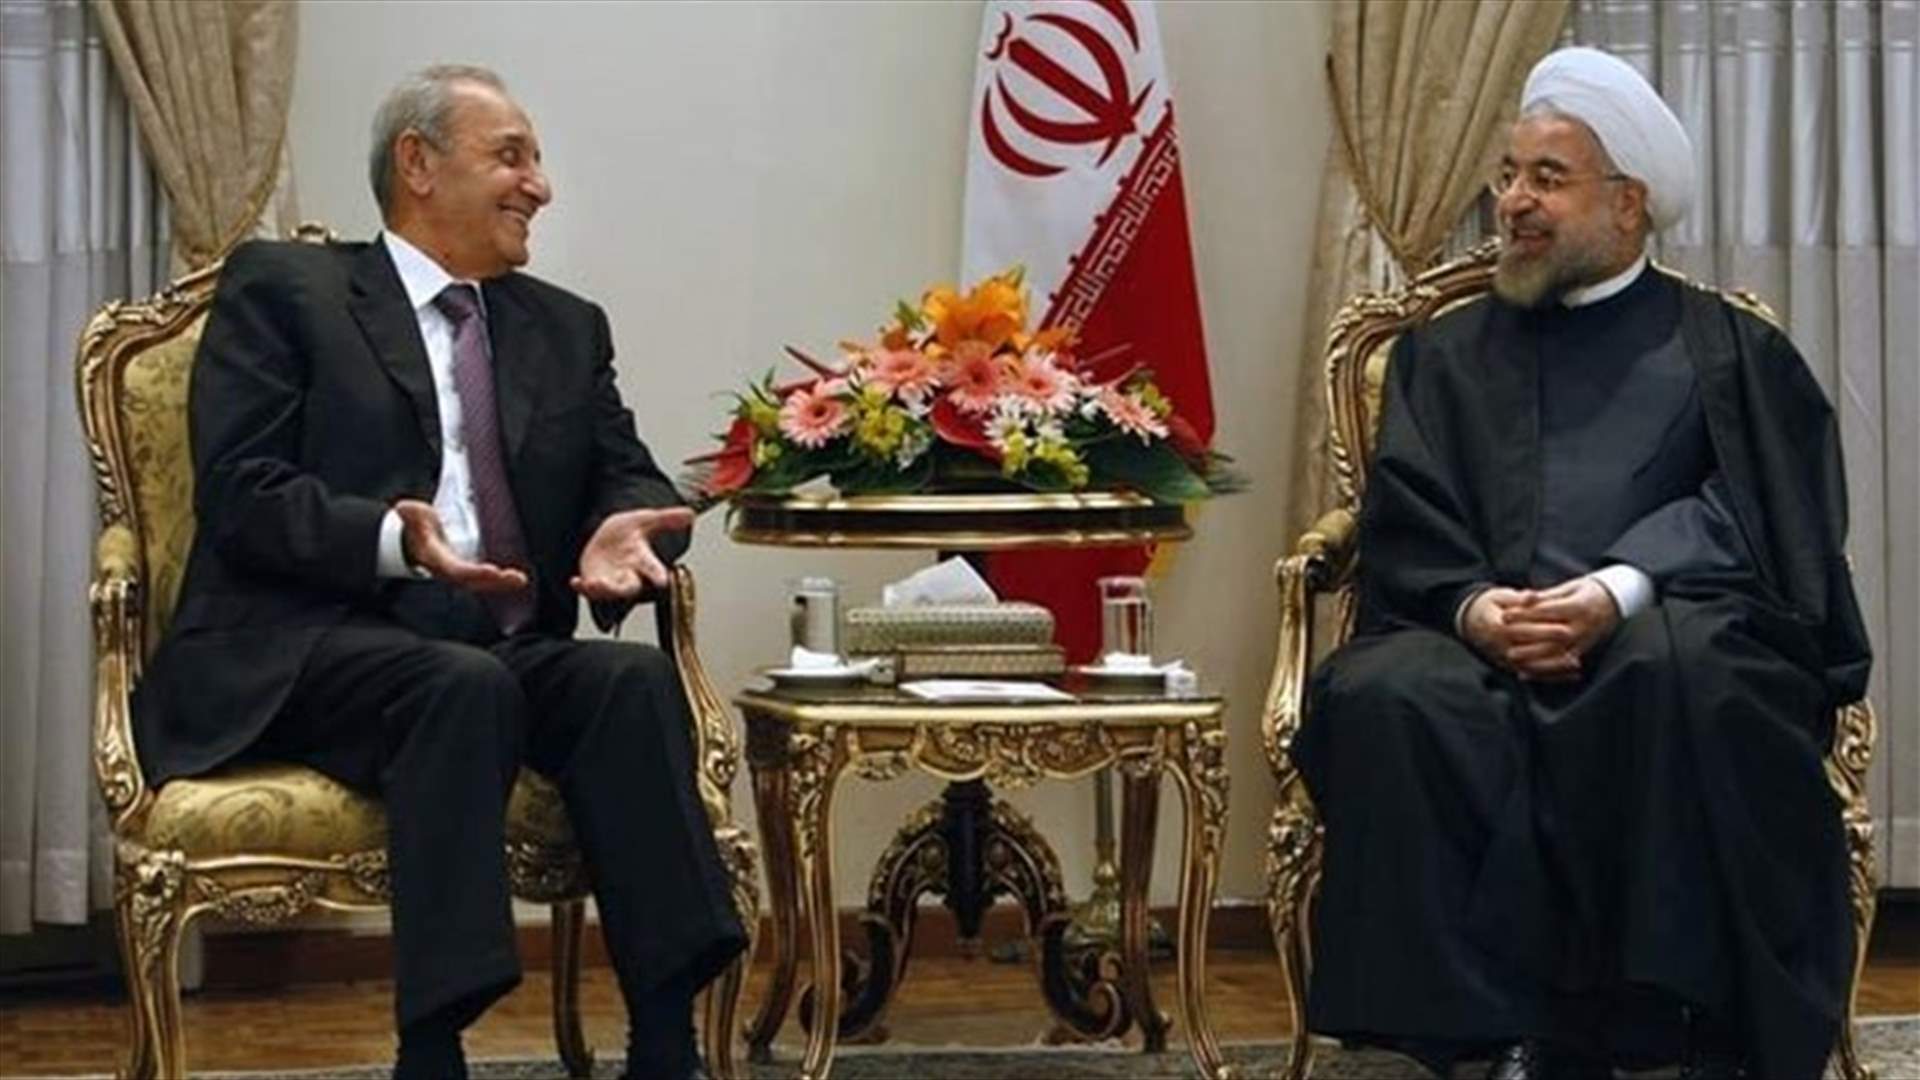 Rouhani addressing Berri: We pin hopes on your role in Lebanon’s stability